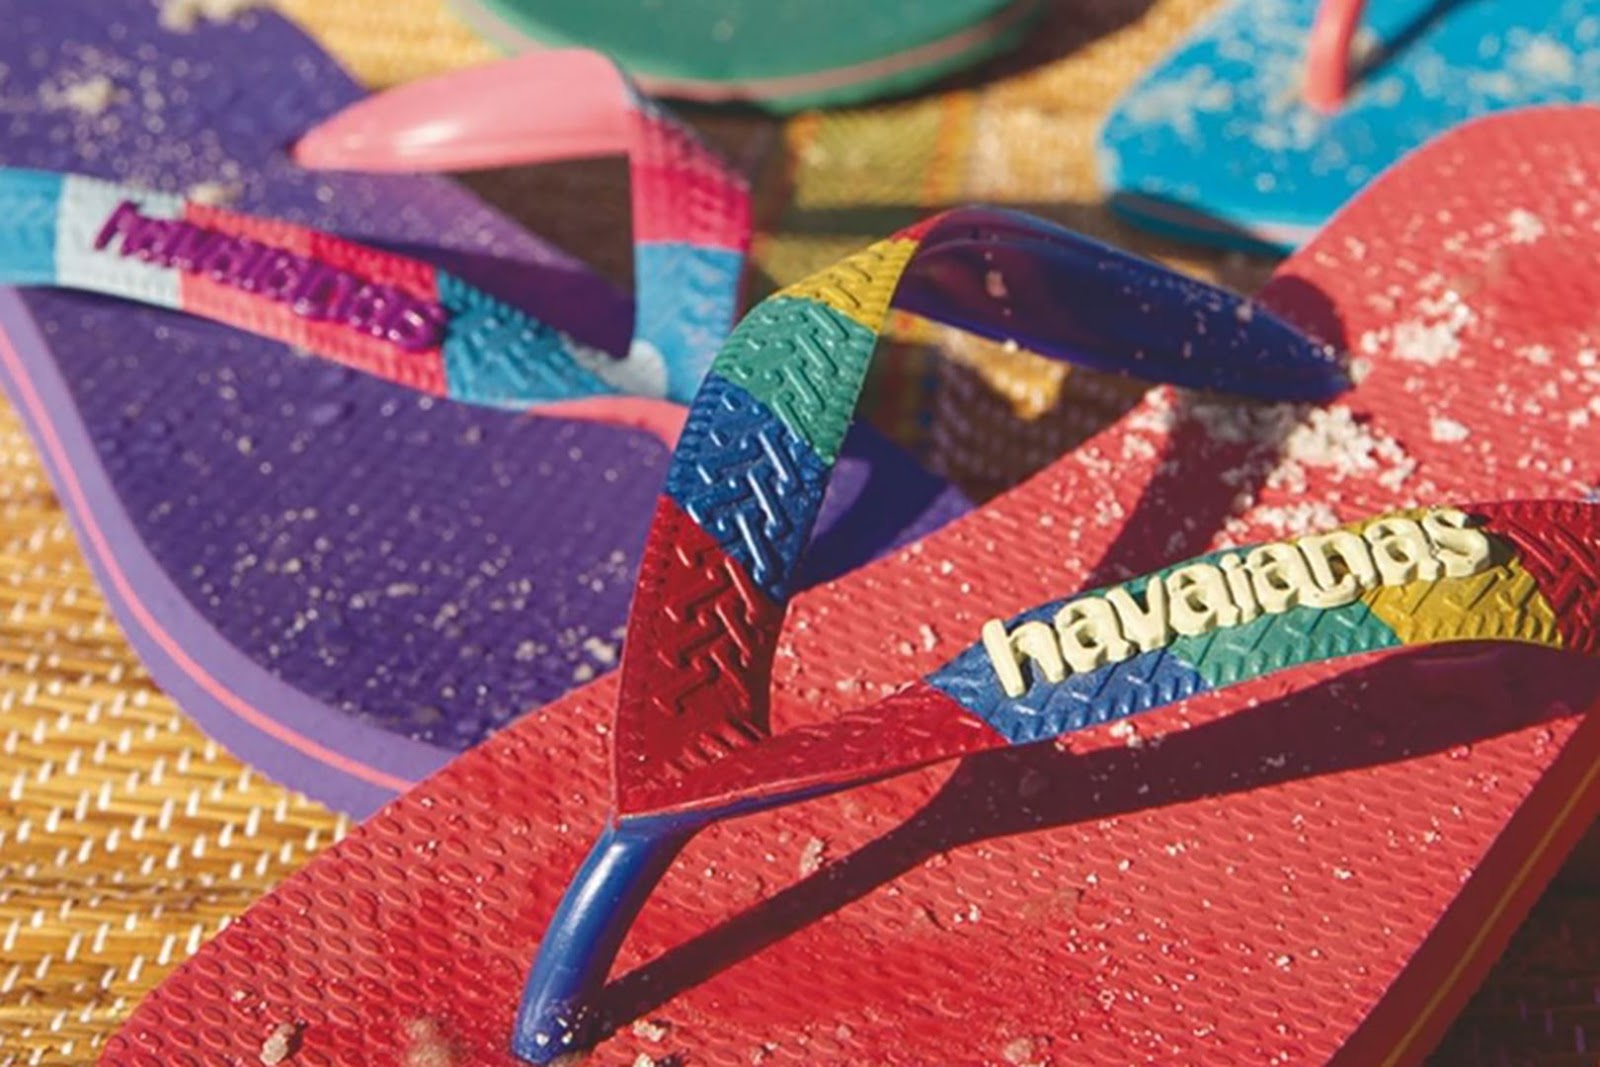 Havaianas Up Town Center on Sale, 50% OFF | empow-her.com